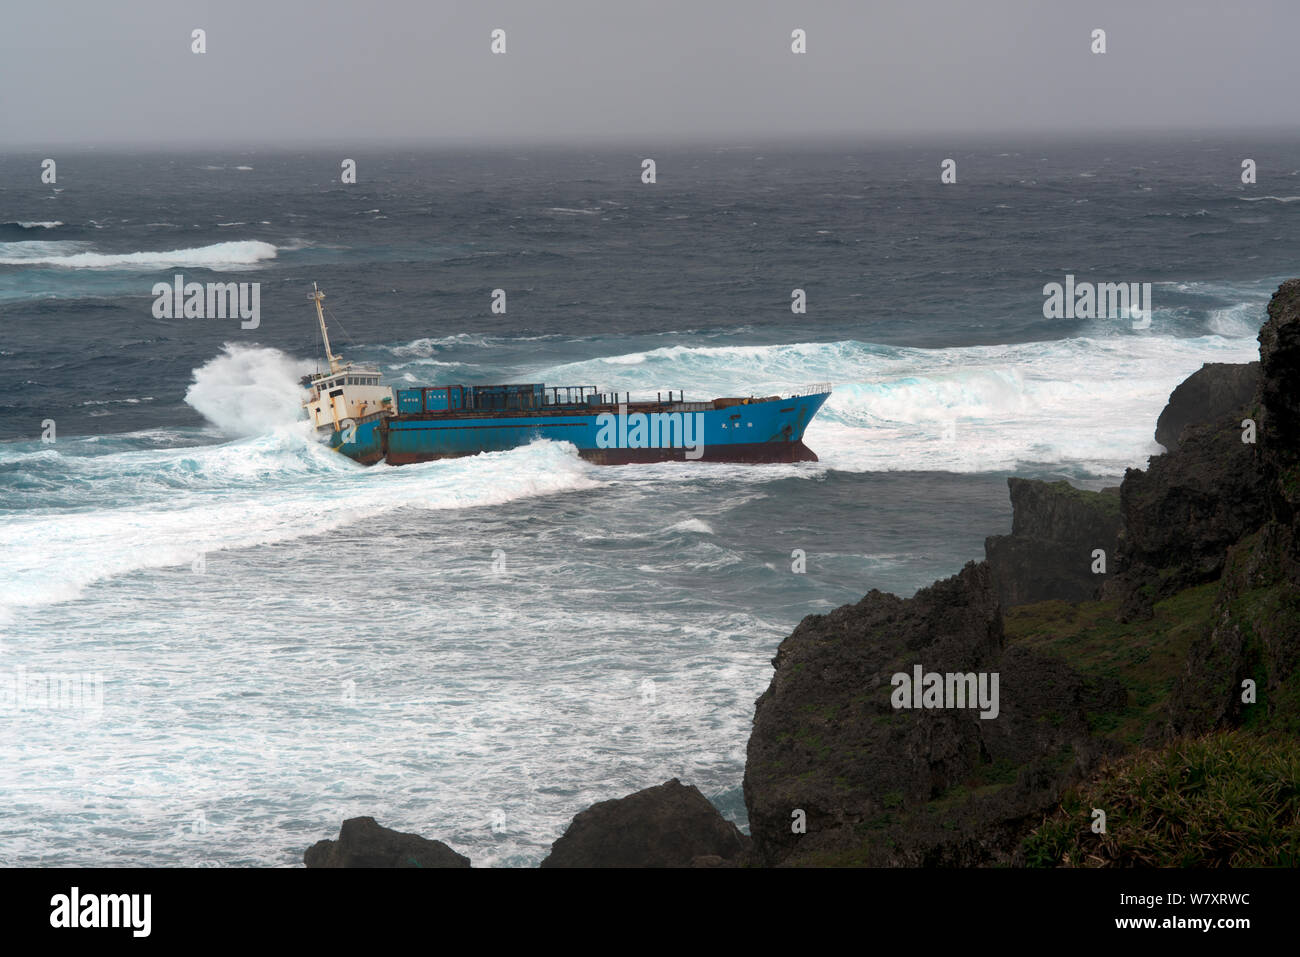 Inter Island container ship, aground and wrecked, Yonaguni Island, East China Sea, Japan. February 2014. Stock Photo